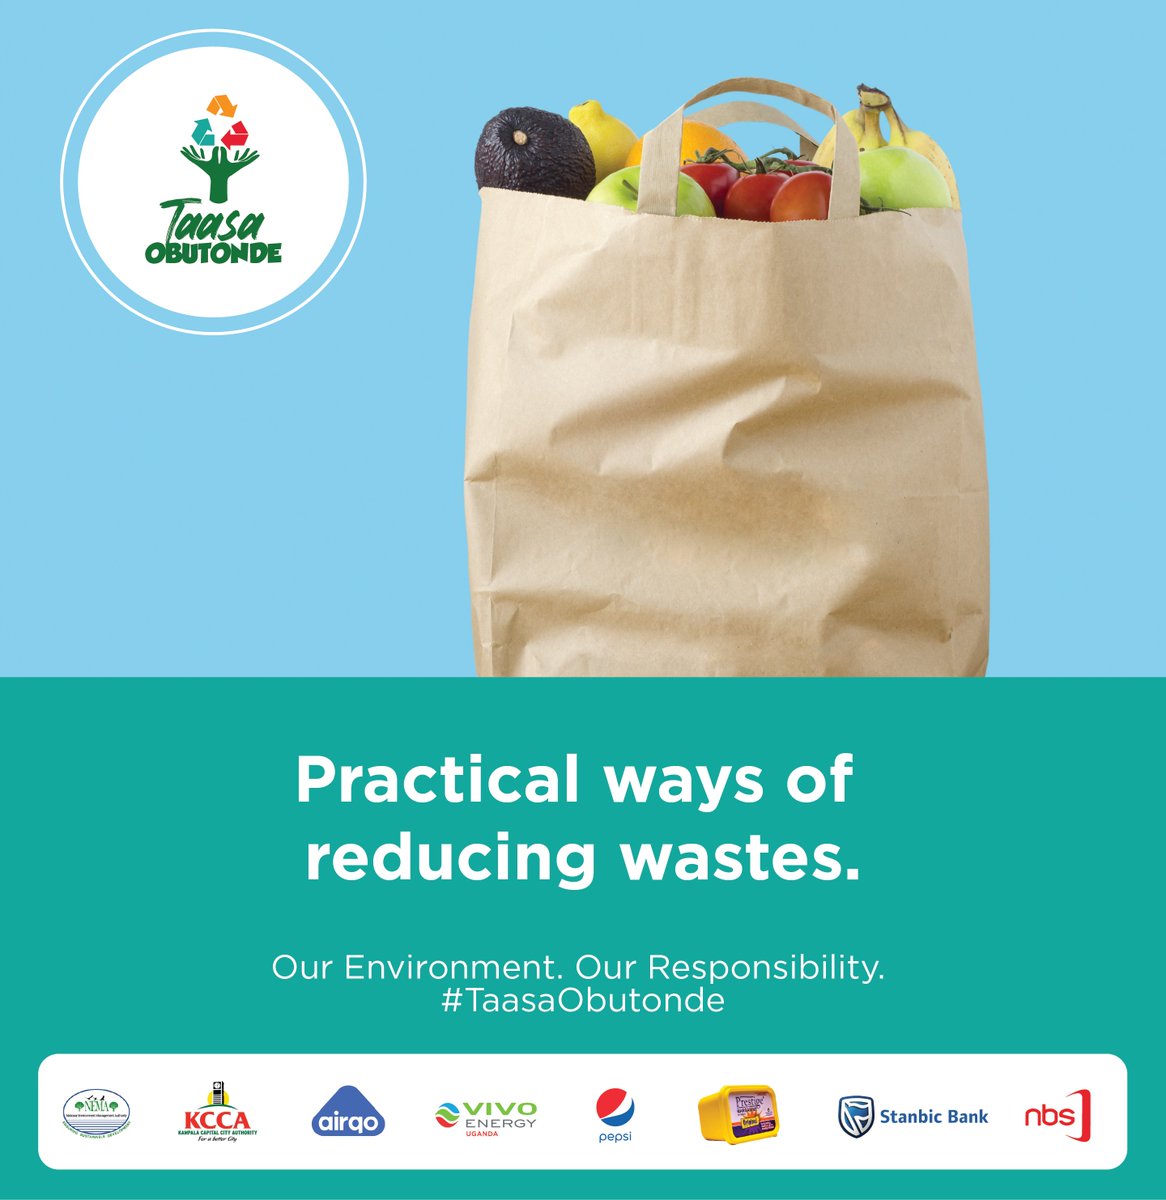 Small changes lead to big impacts! Let’s discuss ways to reduce our plastic usage in everyday life. Share your tips, every effort counts.~@nemaug @AirQoProject @KCCAUG @VivoEnergyUg @PepsiUganda @stanbicug @nbstv #TaasaObutonde